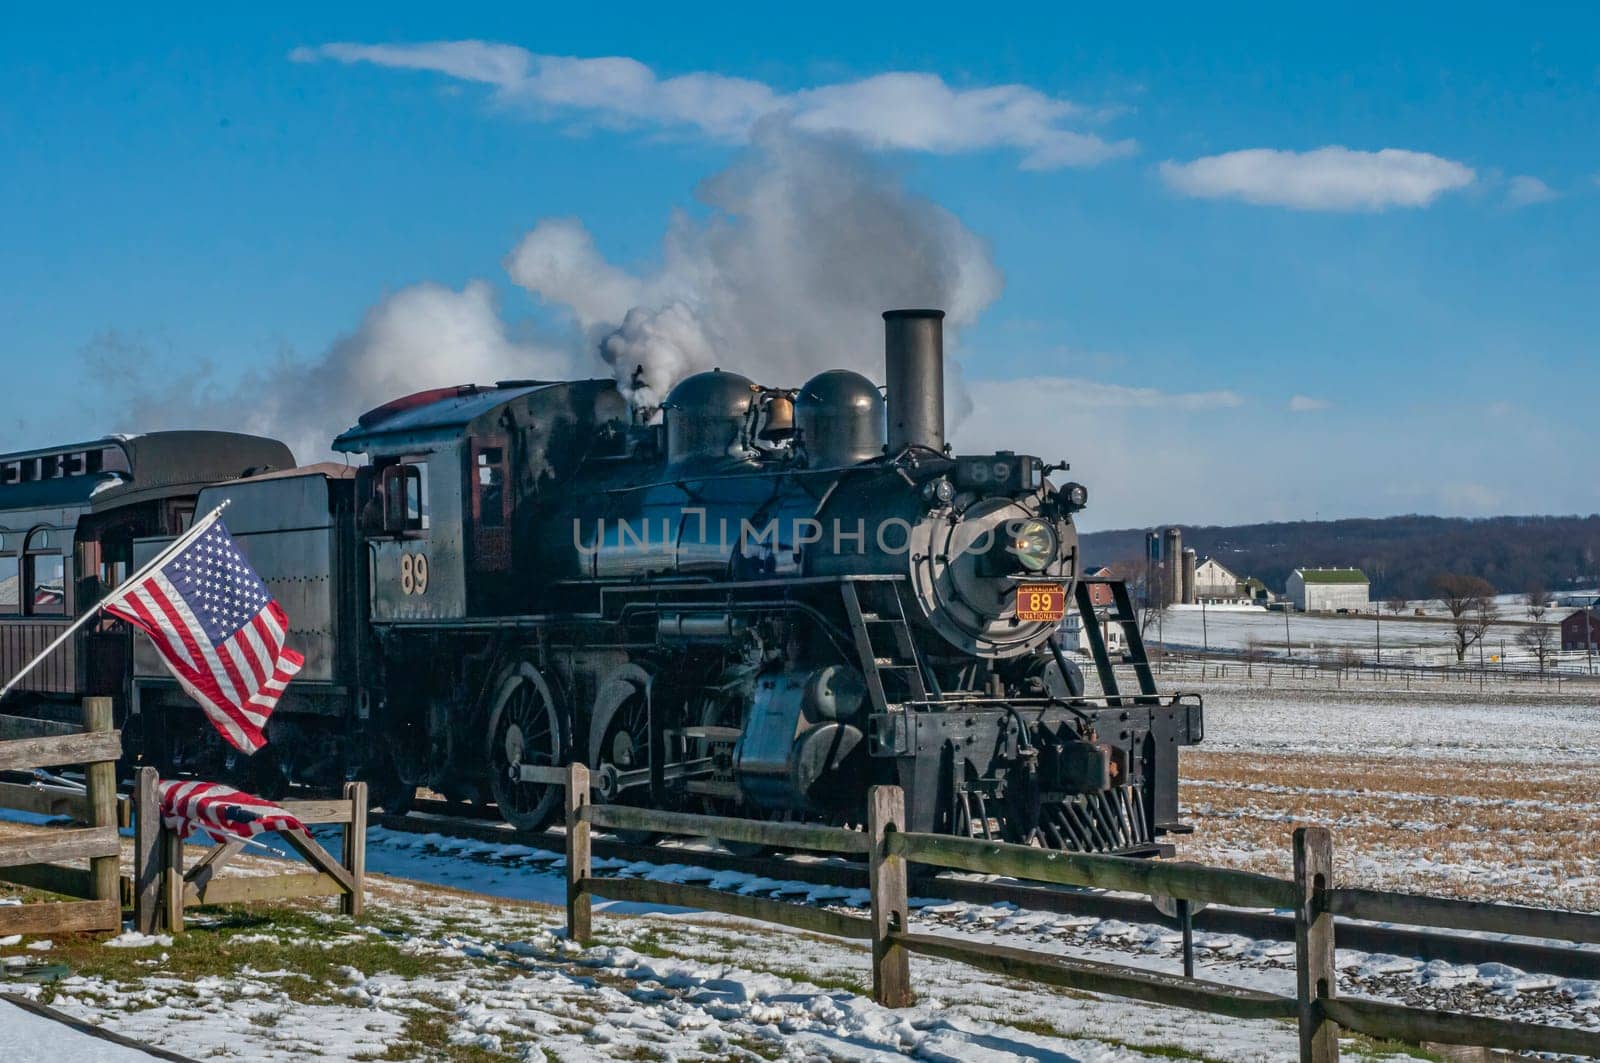 Steam train is pulling train car with American flag. The train is traveling through a snowy field by actionphoto50